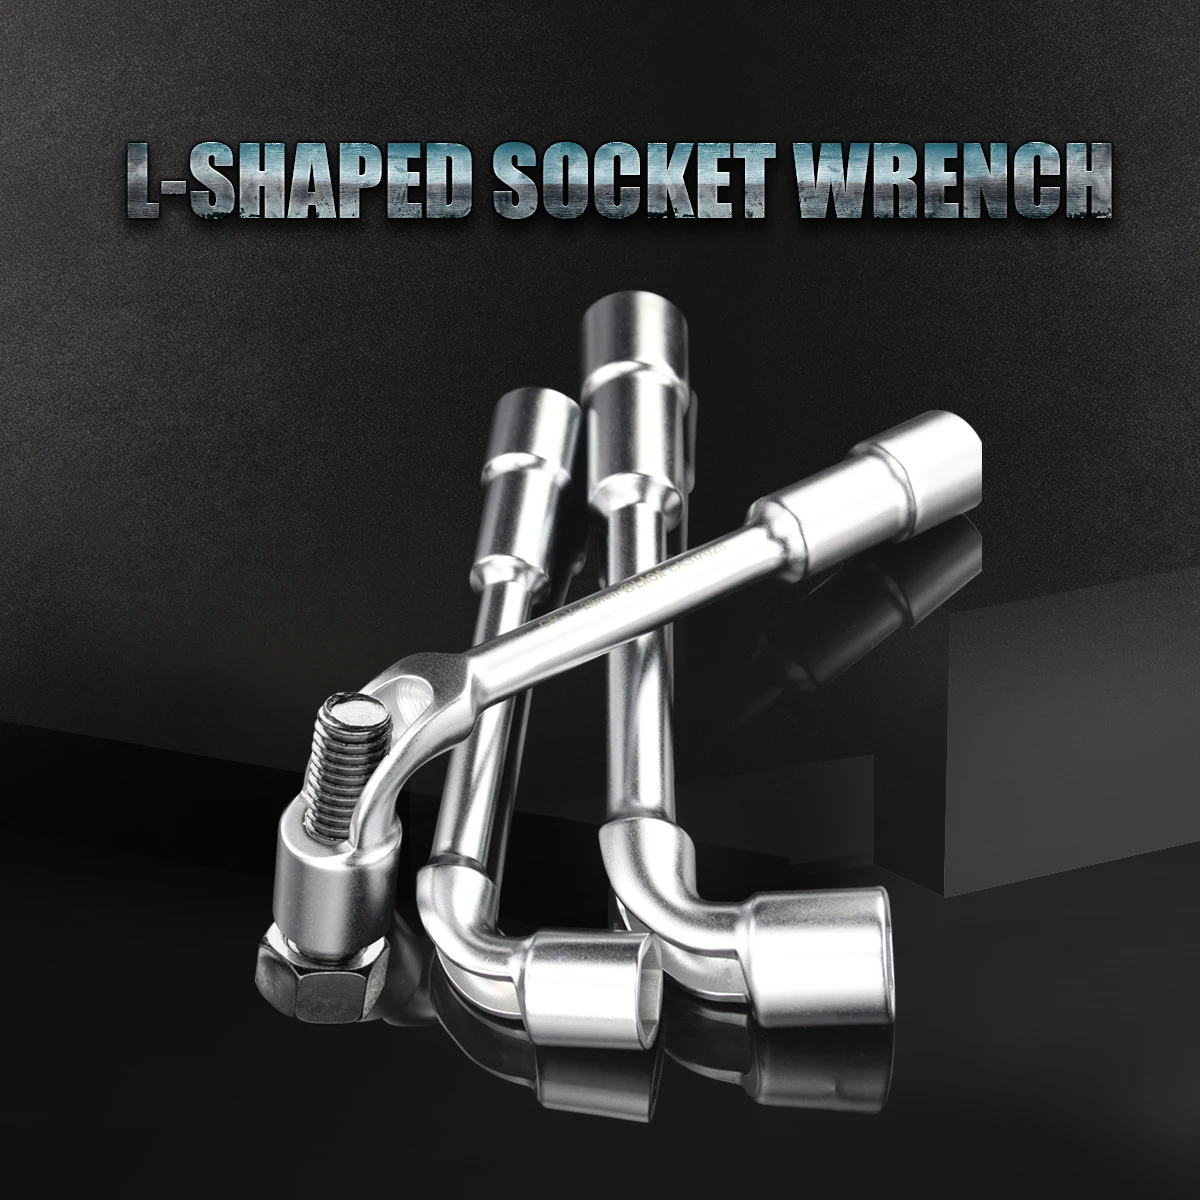 LAOA L Shape Socket Wrench Cr-V Multifunction 7 Style Hex Wrench Verhical Workshop Repair Tools 6-14MM